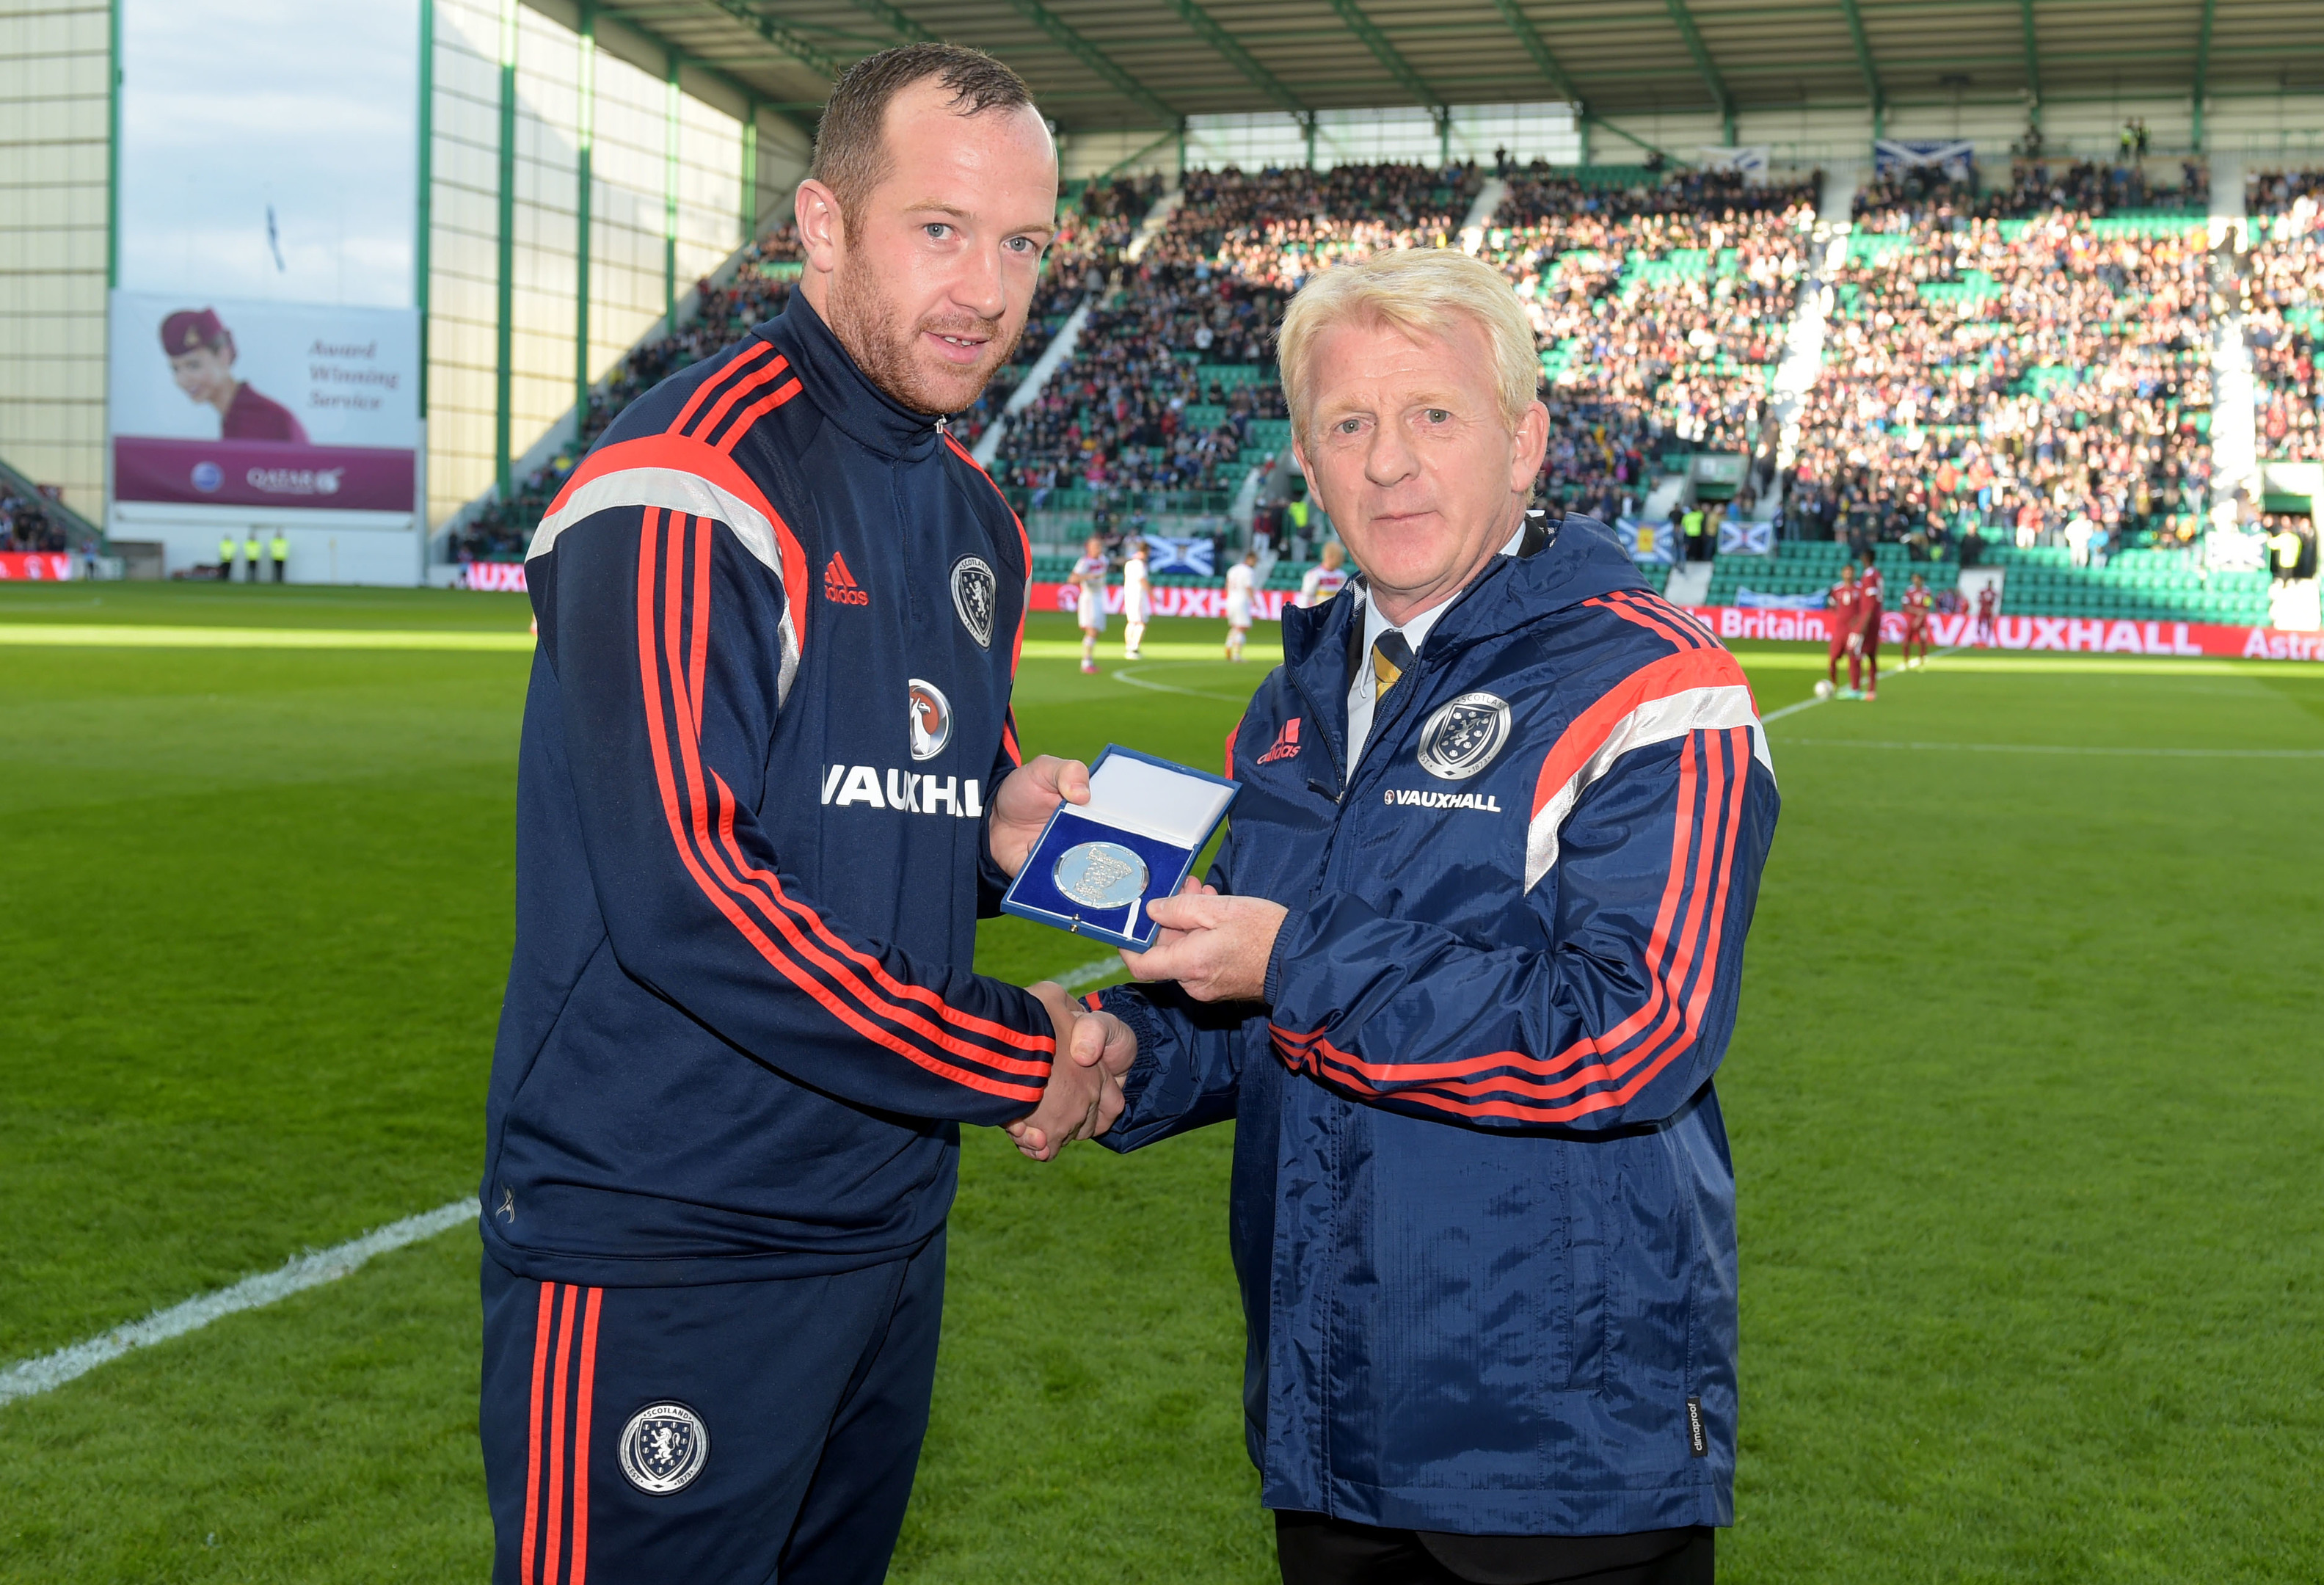 Scotland midfielder Charlie Adam is presented with a gift for reaching 25 caps by manager Gordon Strachan (right) (SNS Group)